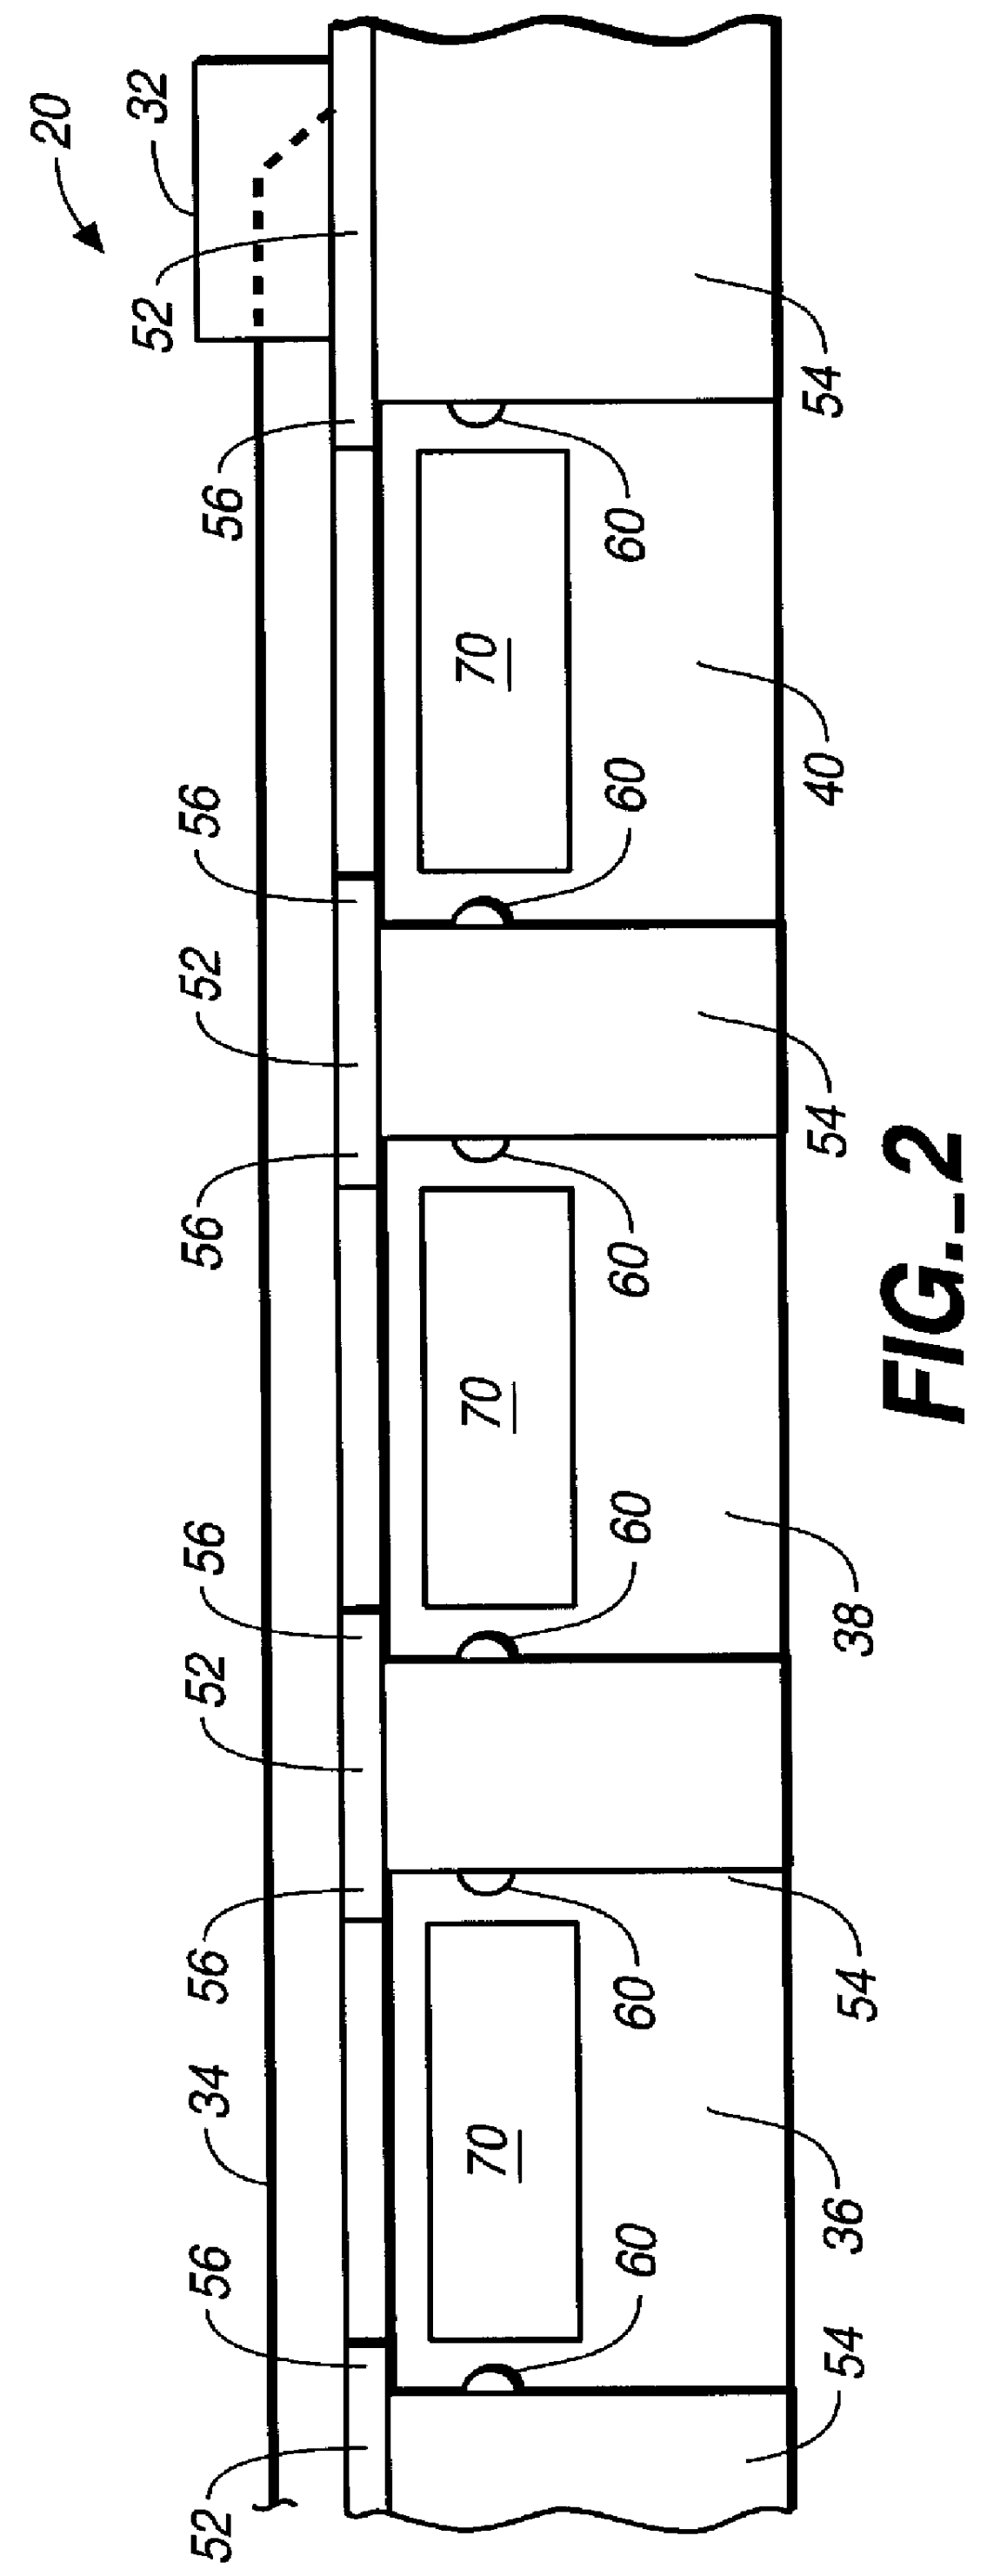 Interchangeable pickup, electric stringed instrument and system for an electric stringed musical instrument